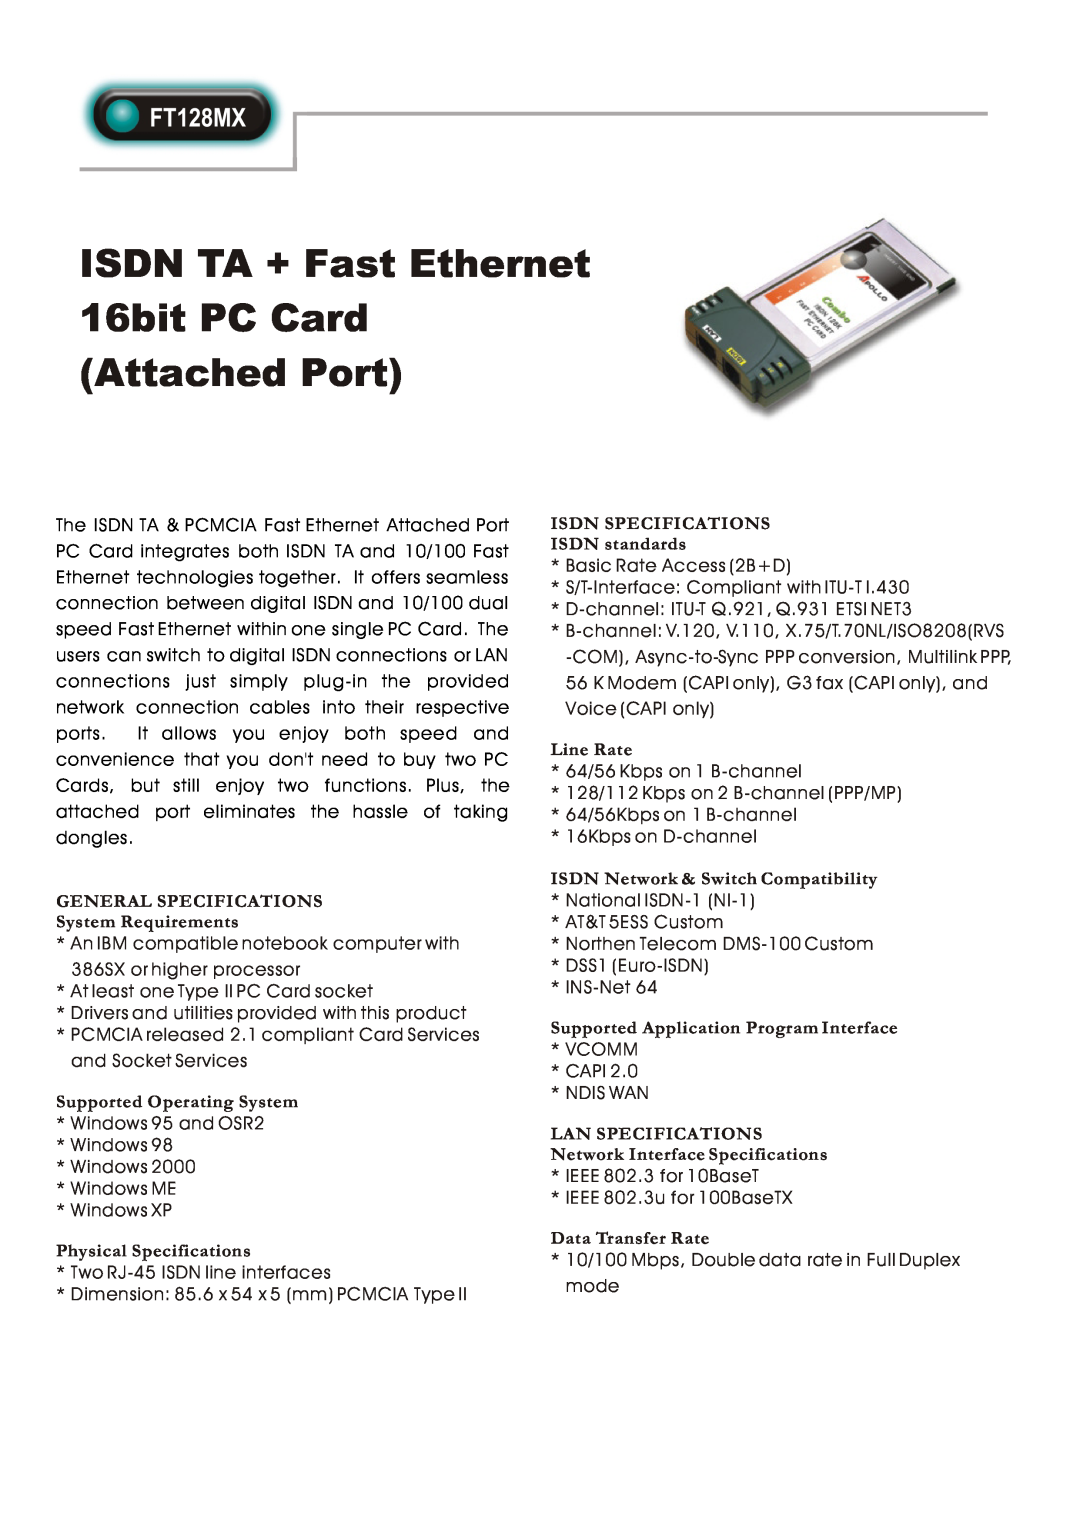 Abocom FT128MX specifications ISDN TA + Fast Ethernet 16bit PC Card Attached Port, Supported Operating System, Line Rate 